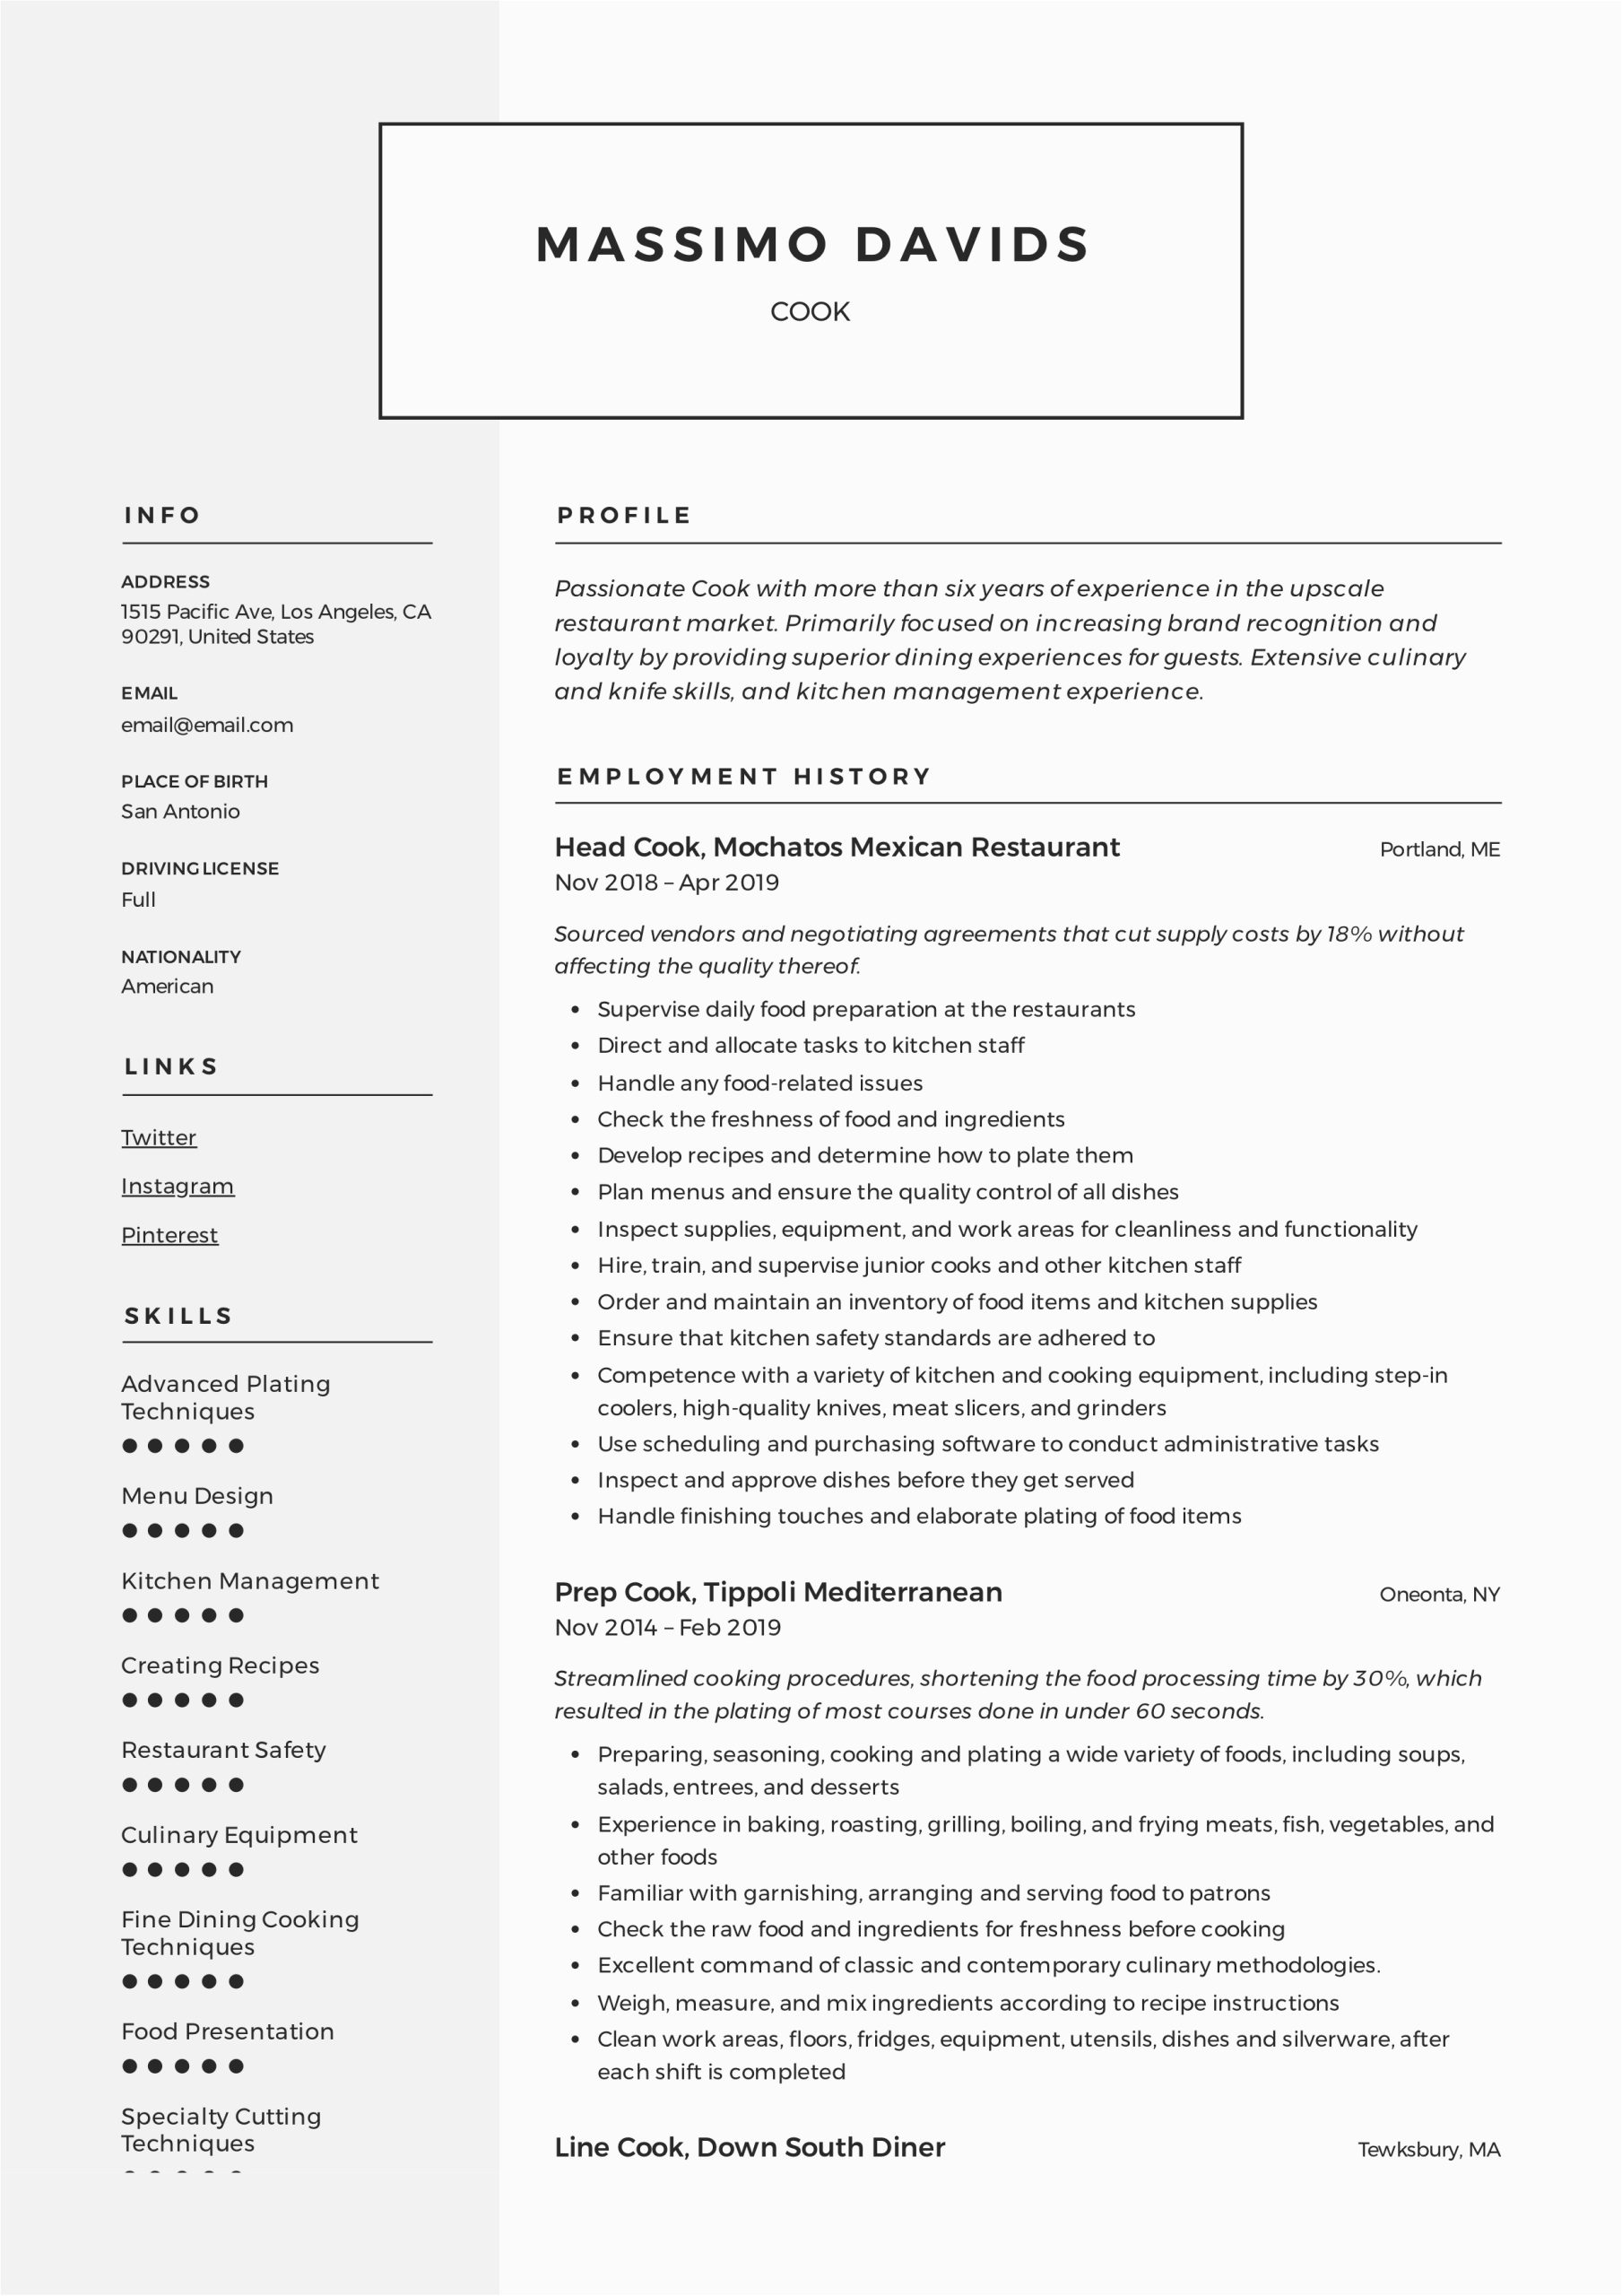 Sample Resume Profile for A Cook Cook Resume Writing Guide 12 Resume Templates